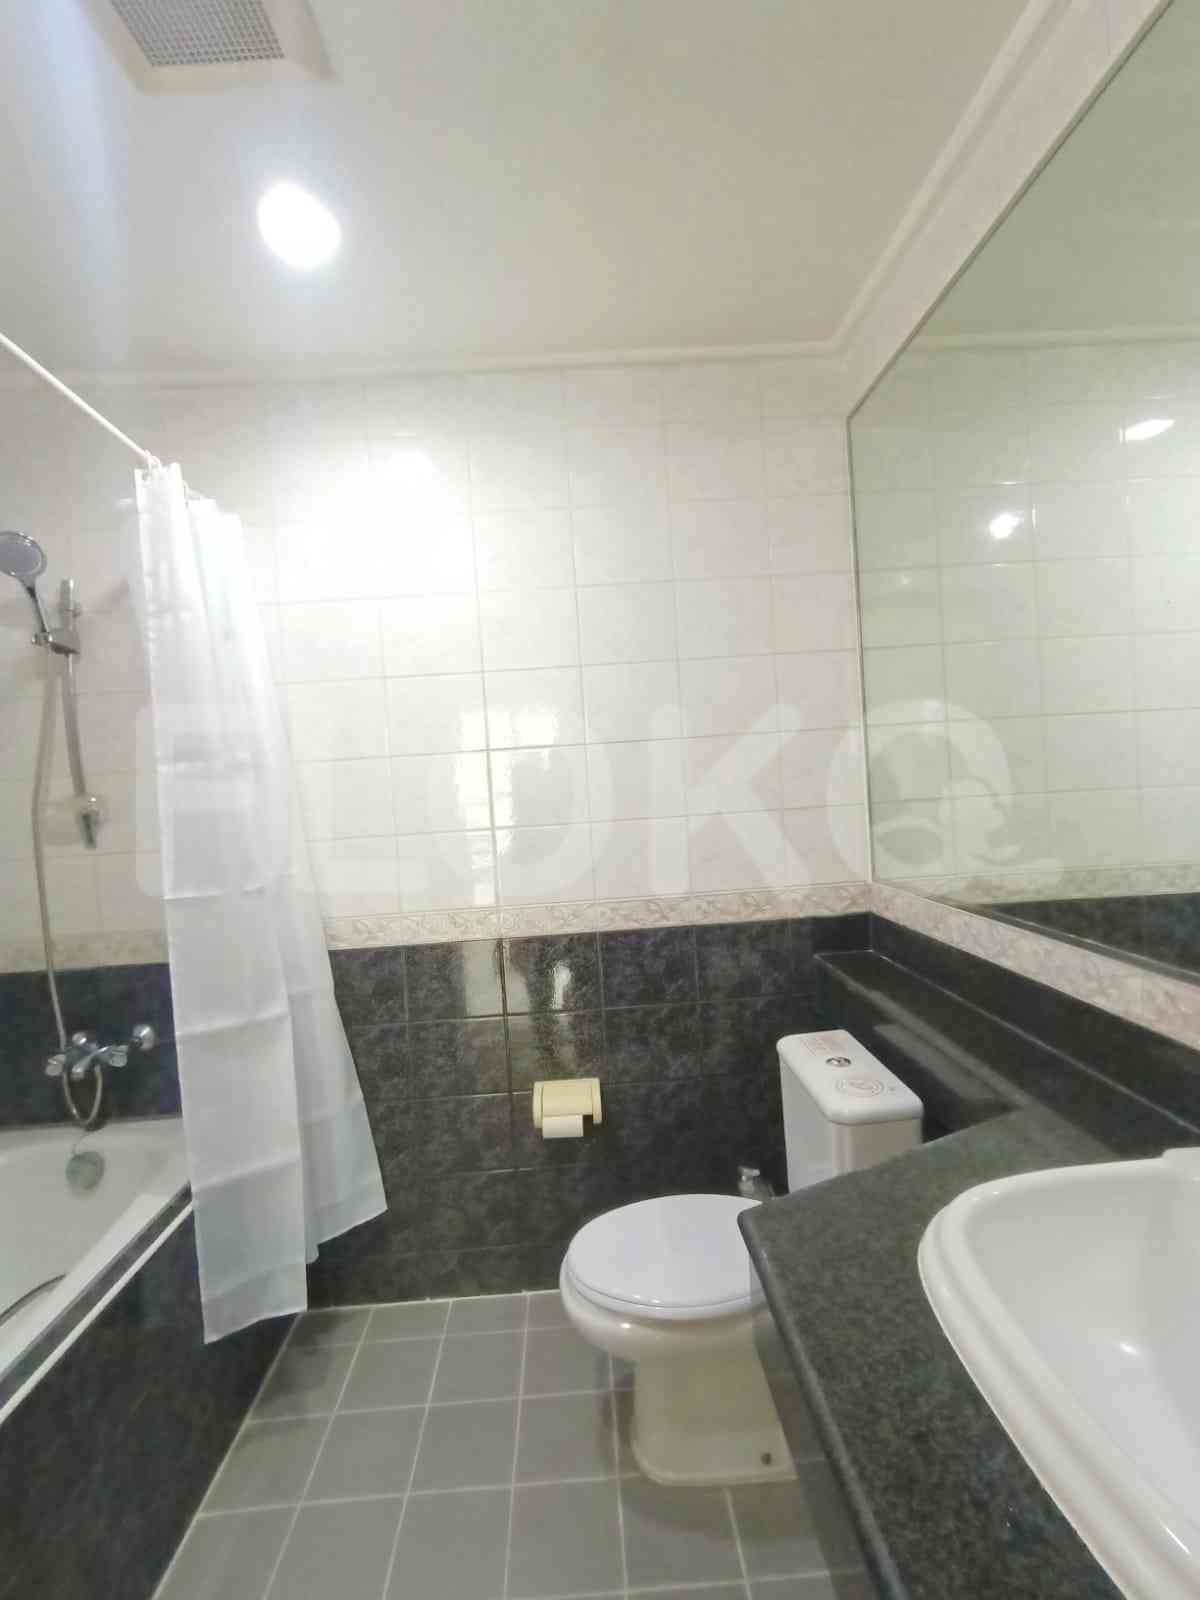 3 Bedroom on 15th Floor for Rent in Casablanca Apartment - fte88e 8